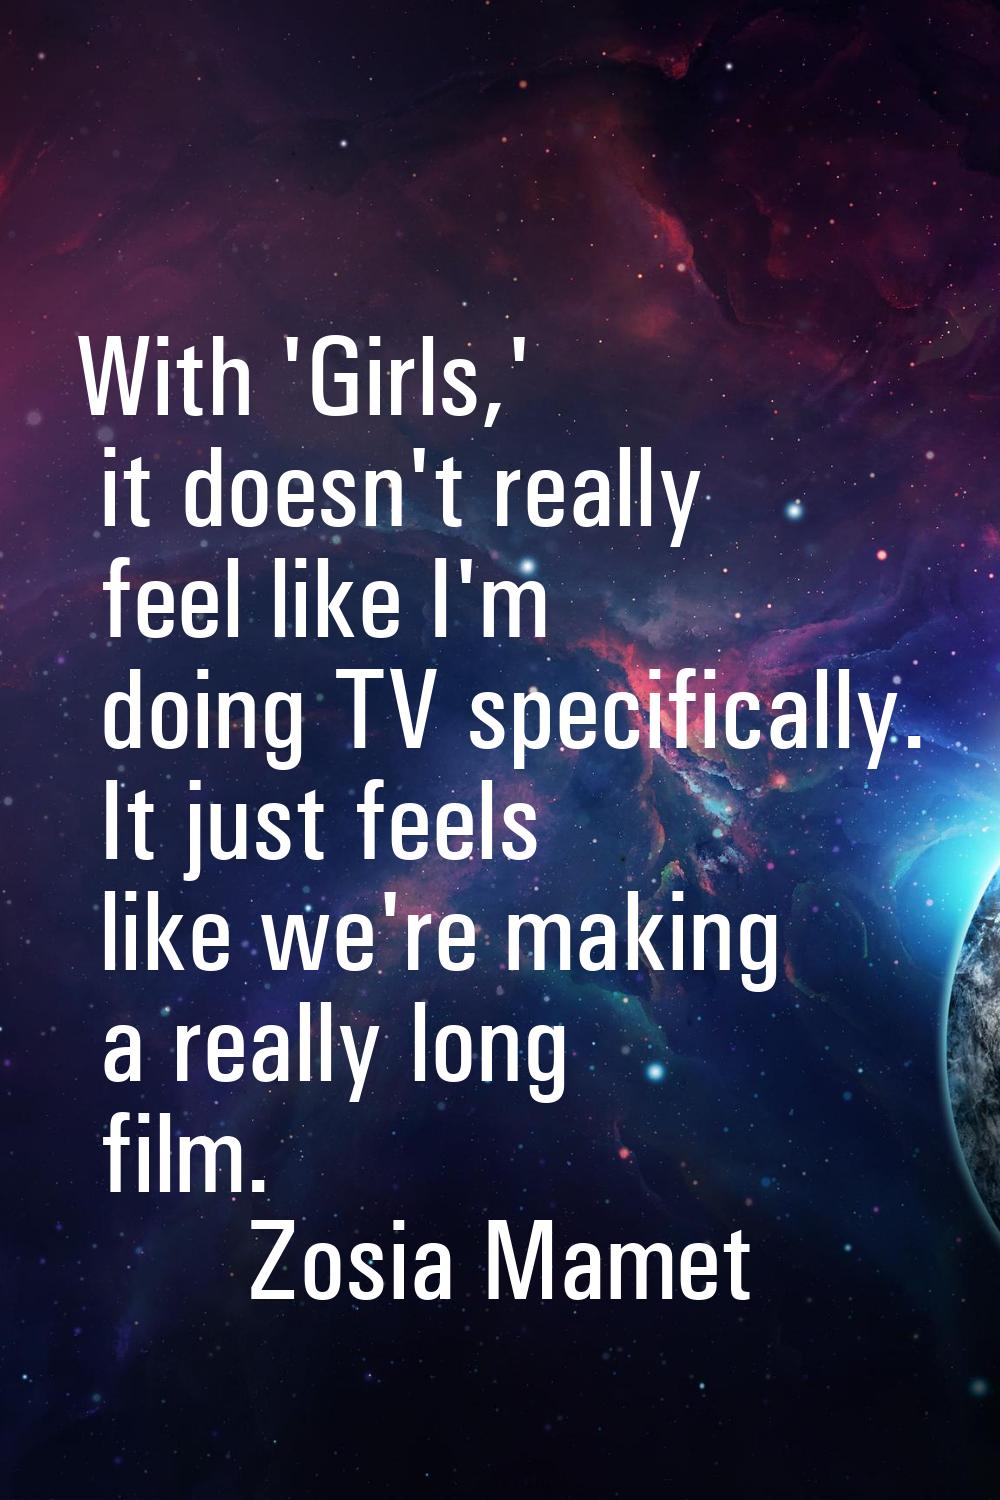 With 'Girls,' it doesn't really feel like I'm doing TV specifically. It just feels like we're makin